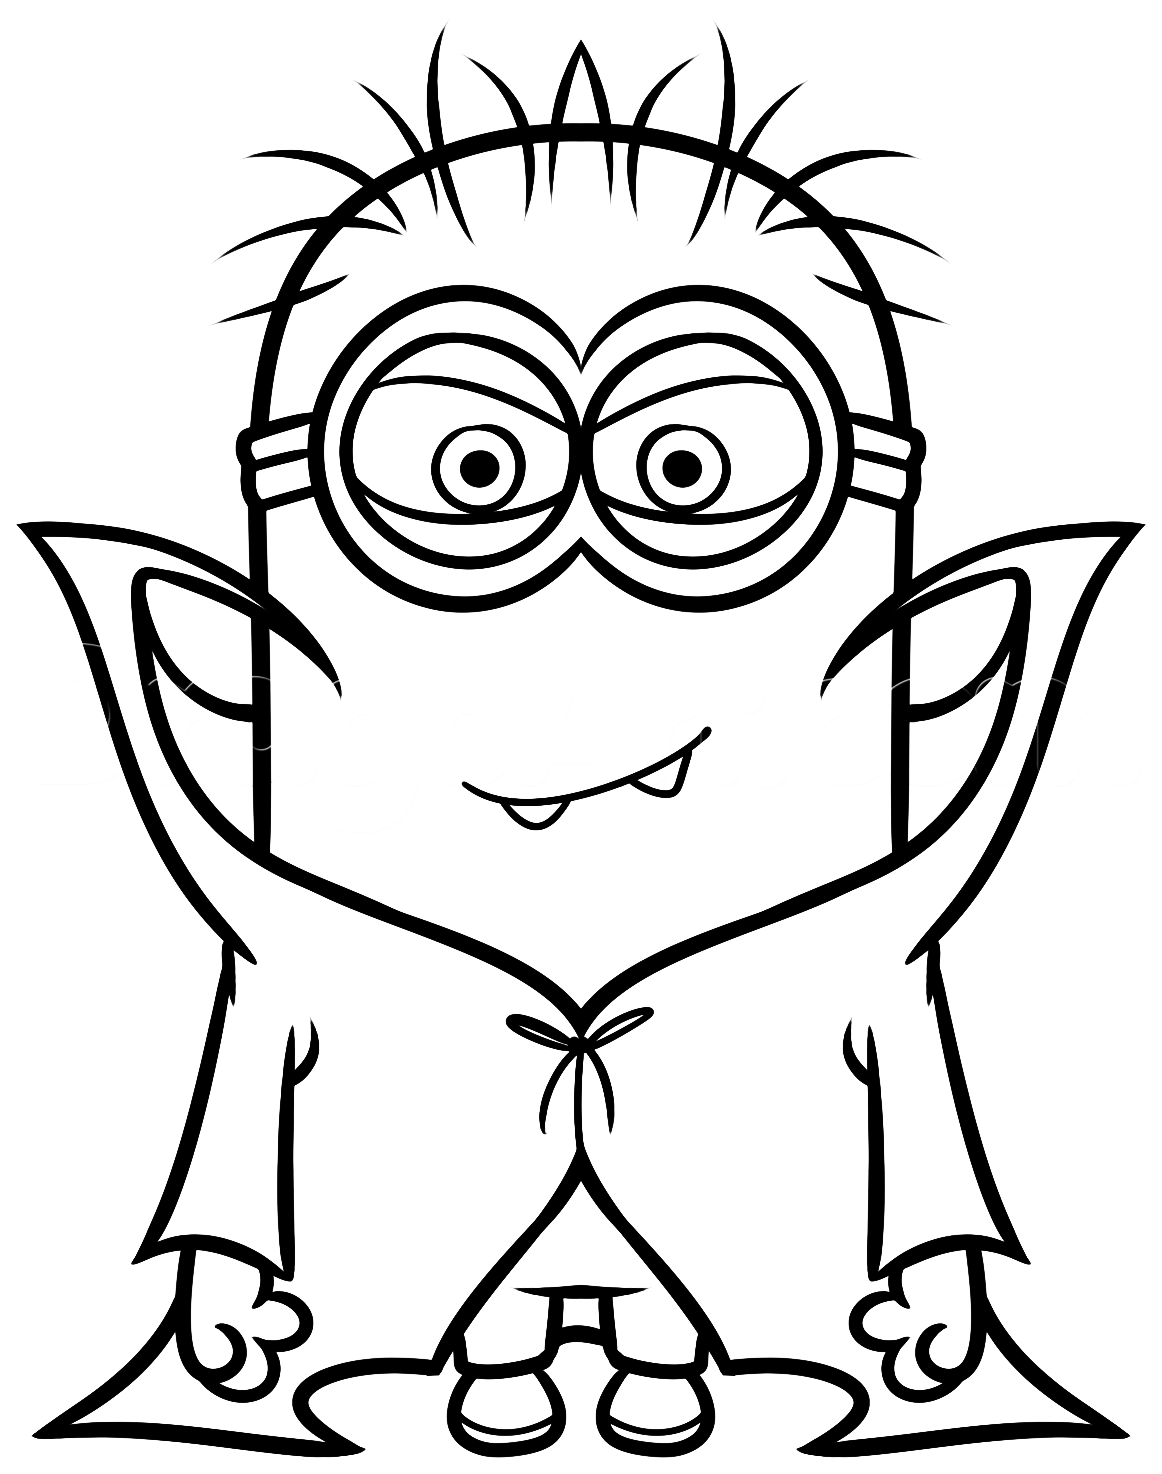 Minions to color for children   Minions Kids Coloring Pages